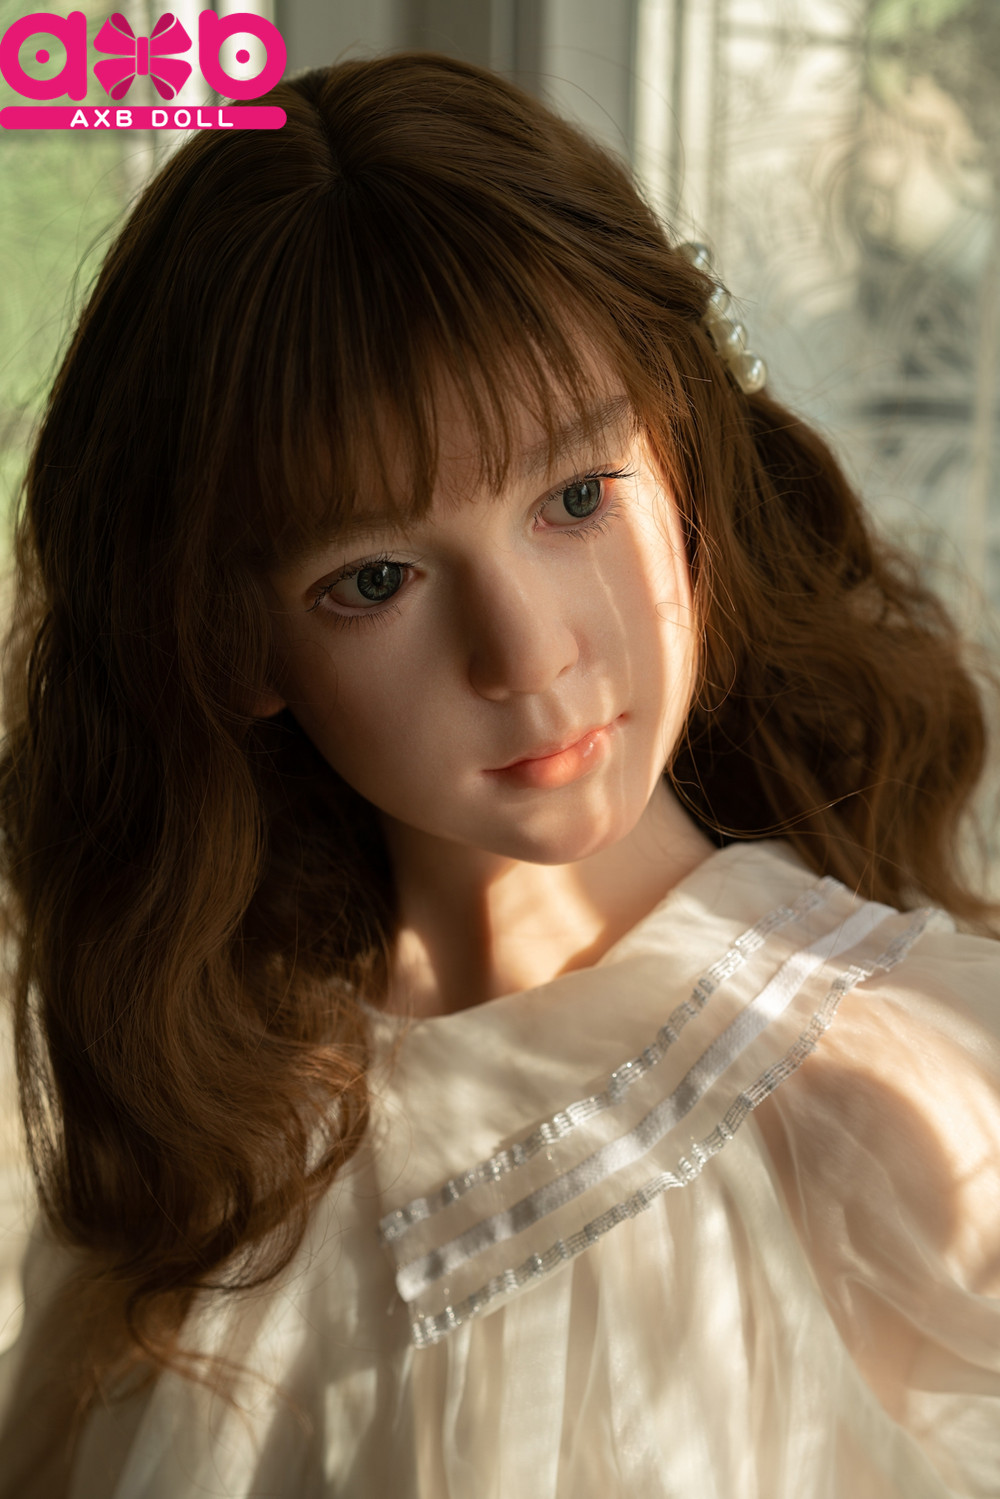 AXBDOLL 142cm G50 Silicone Slight Defective Doll Head Can Choose - 画像をクリックして閉じます